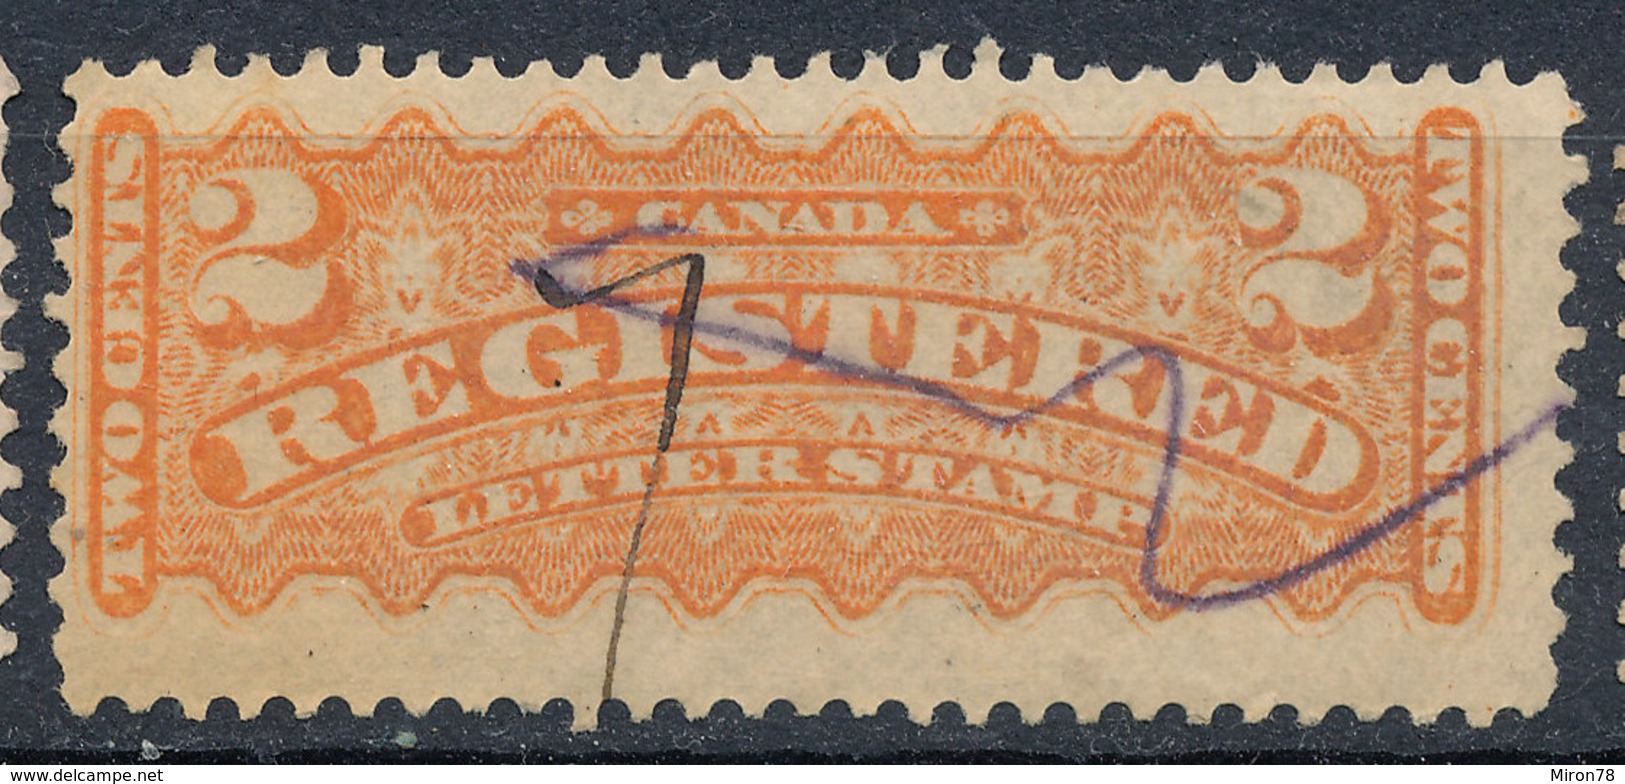 Stamp Canada 1875 Used - Recommandés